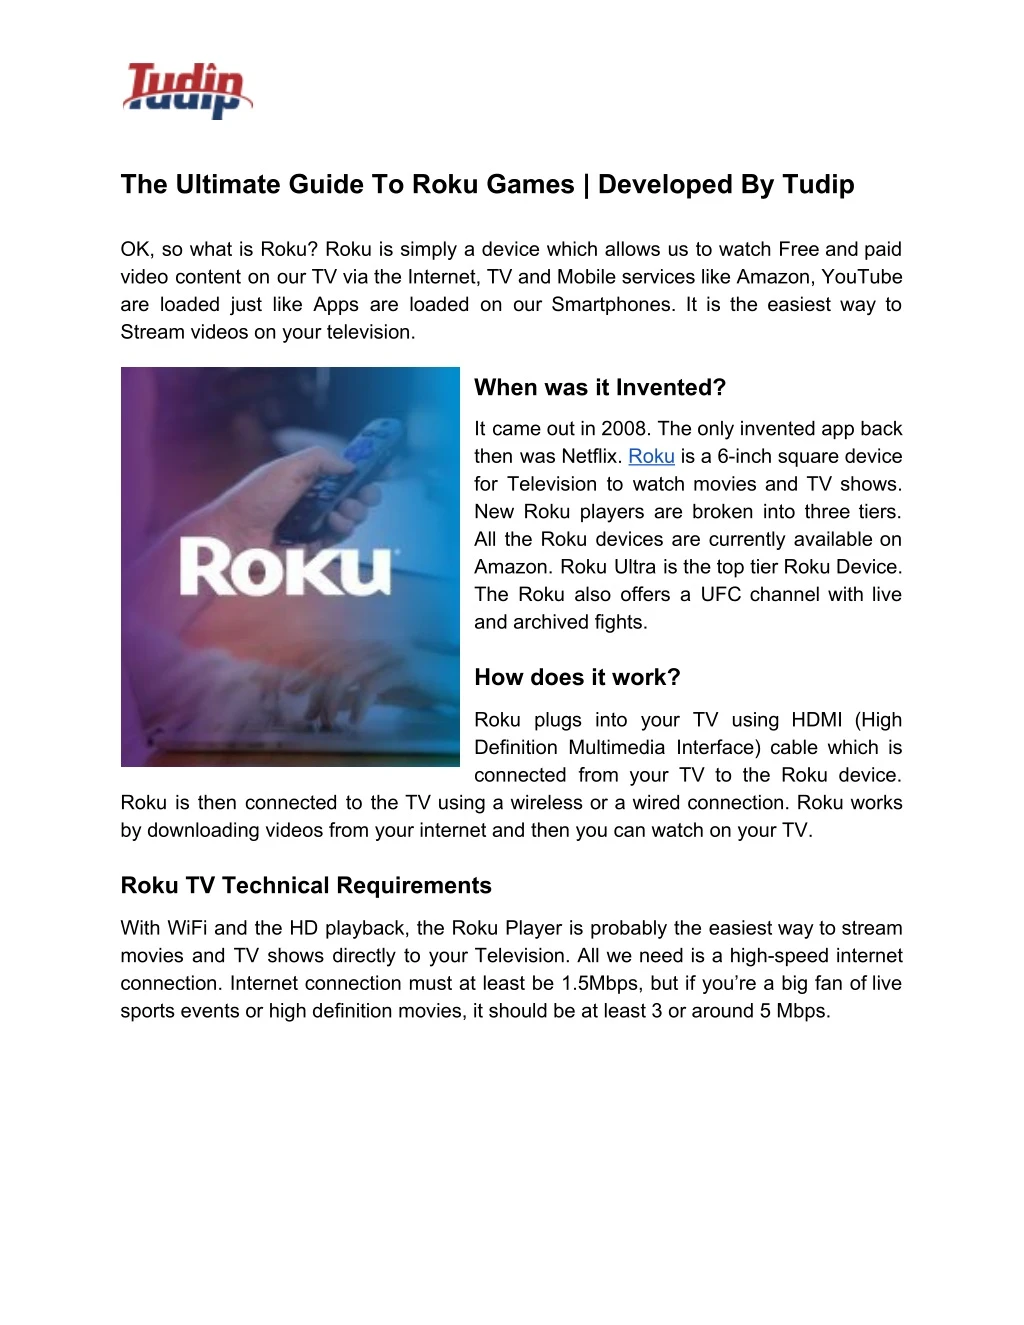 the ultimate guide to roku games developed